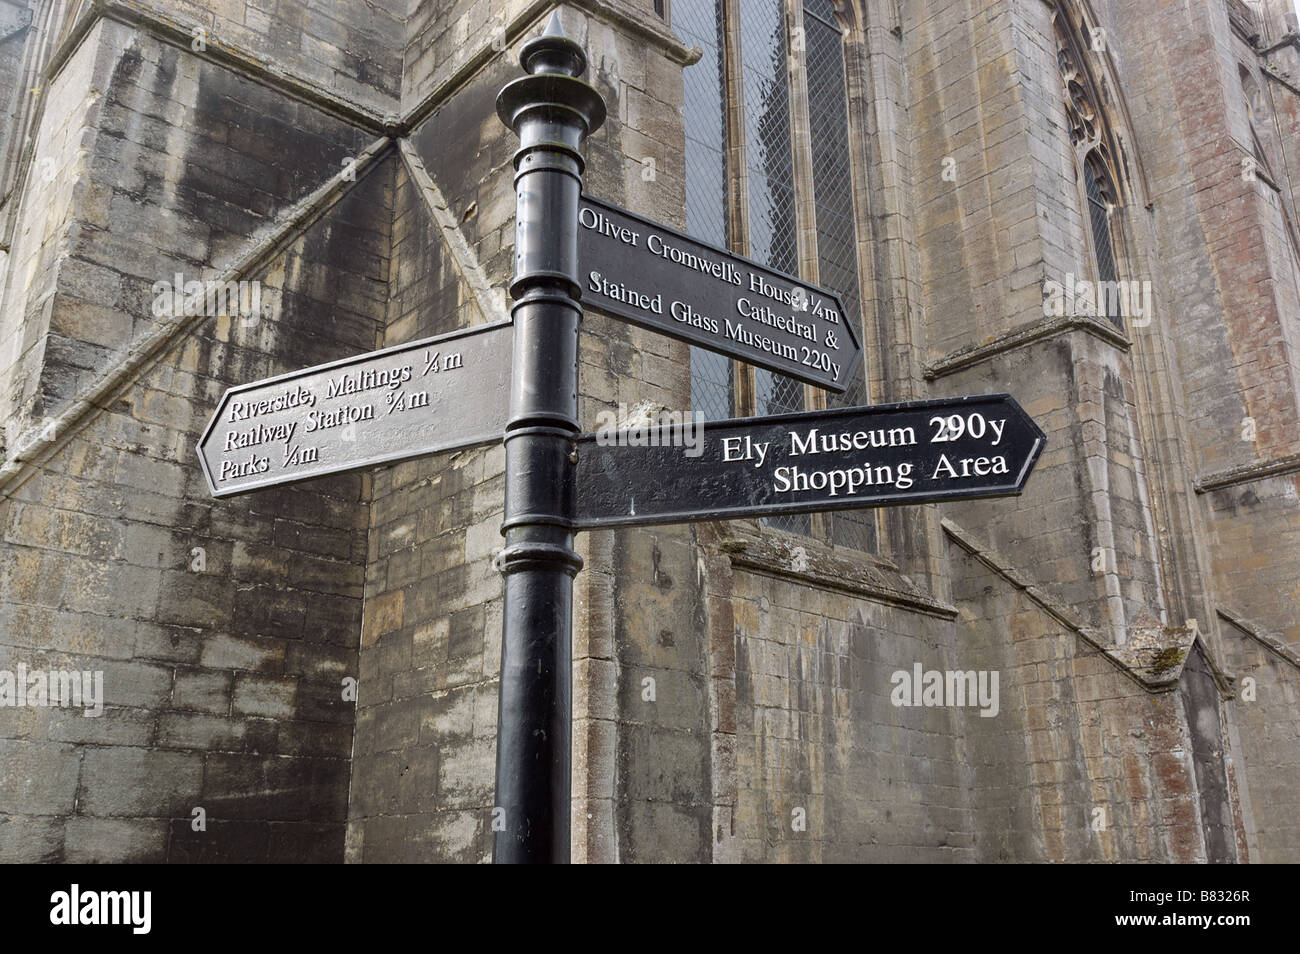 A tourist sign in Ely pointing to Oliver Cromwells House and Ely Museum Stock Photo